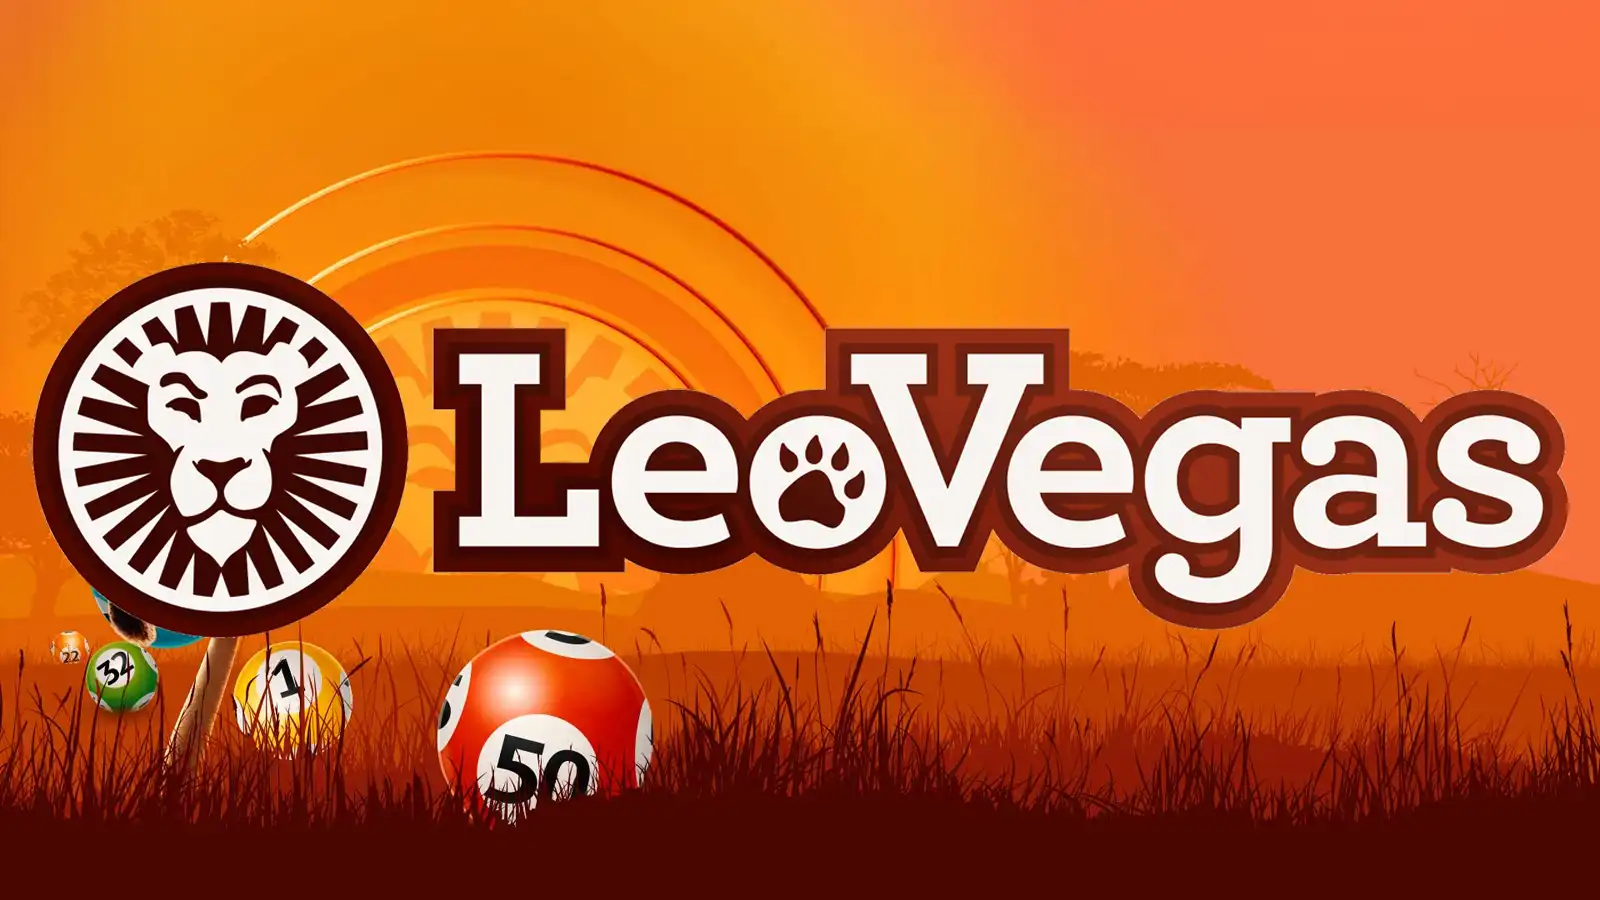 Promotional image for LeoVegas displaying their logo and branding